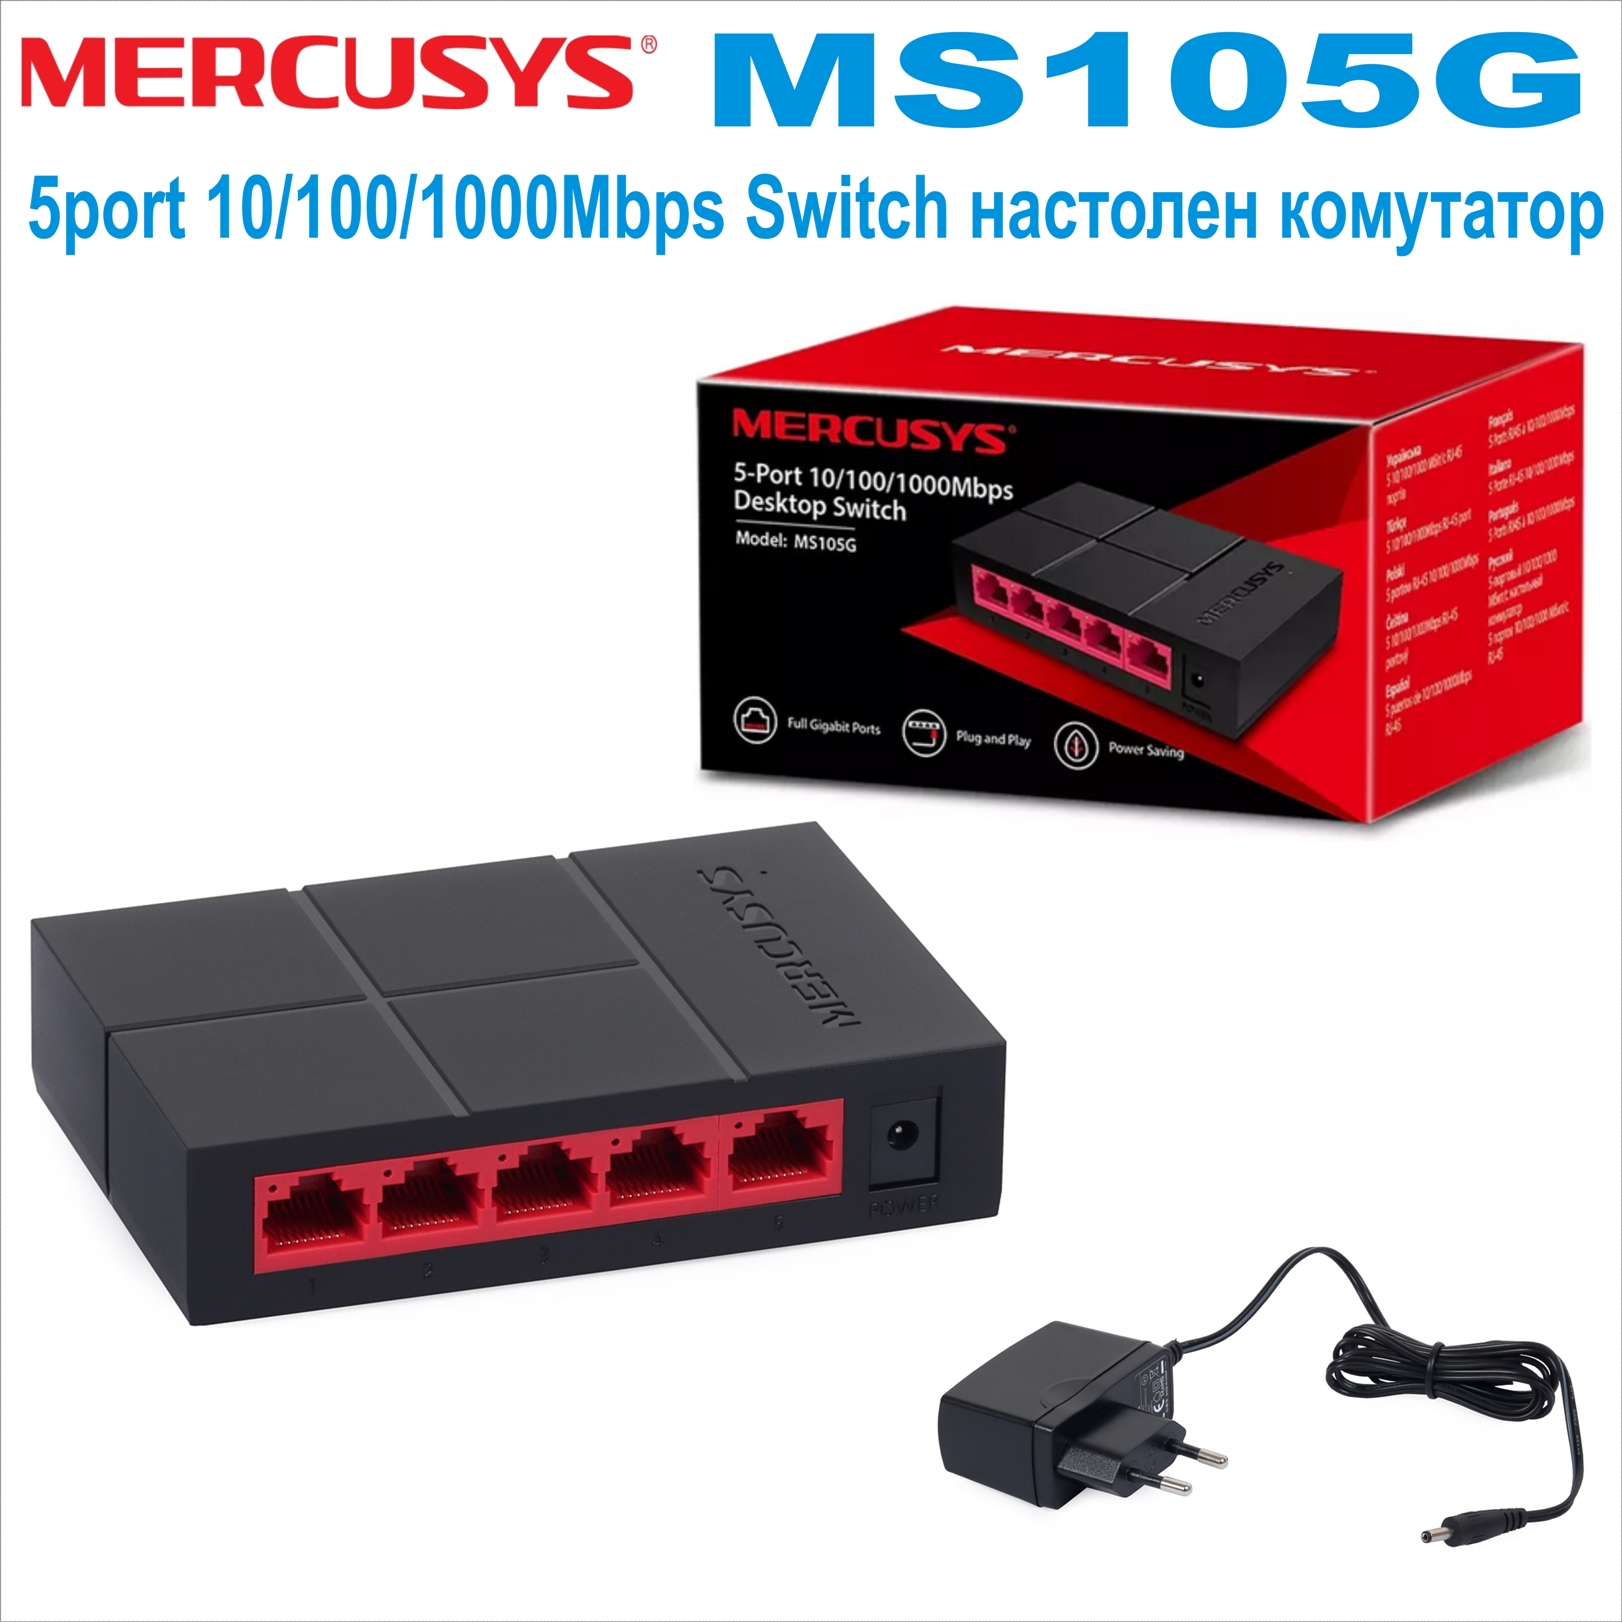 5port 10/100/1000Mbps Switch Mercusys MS105G